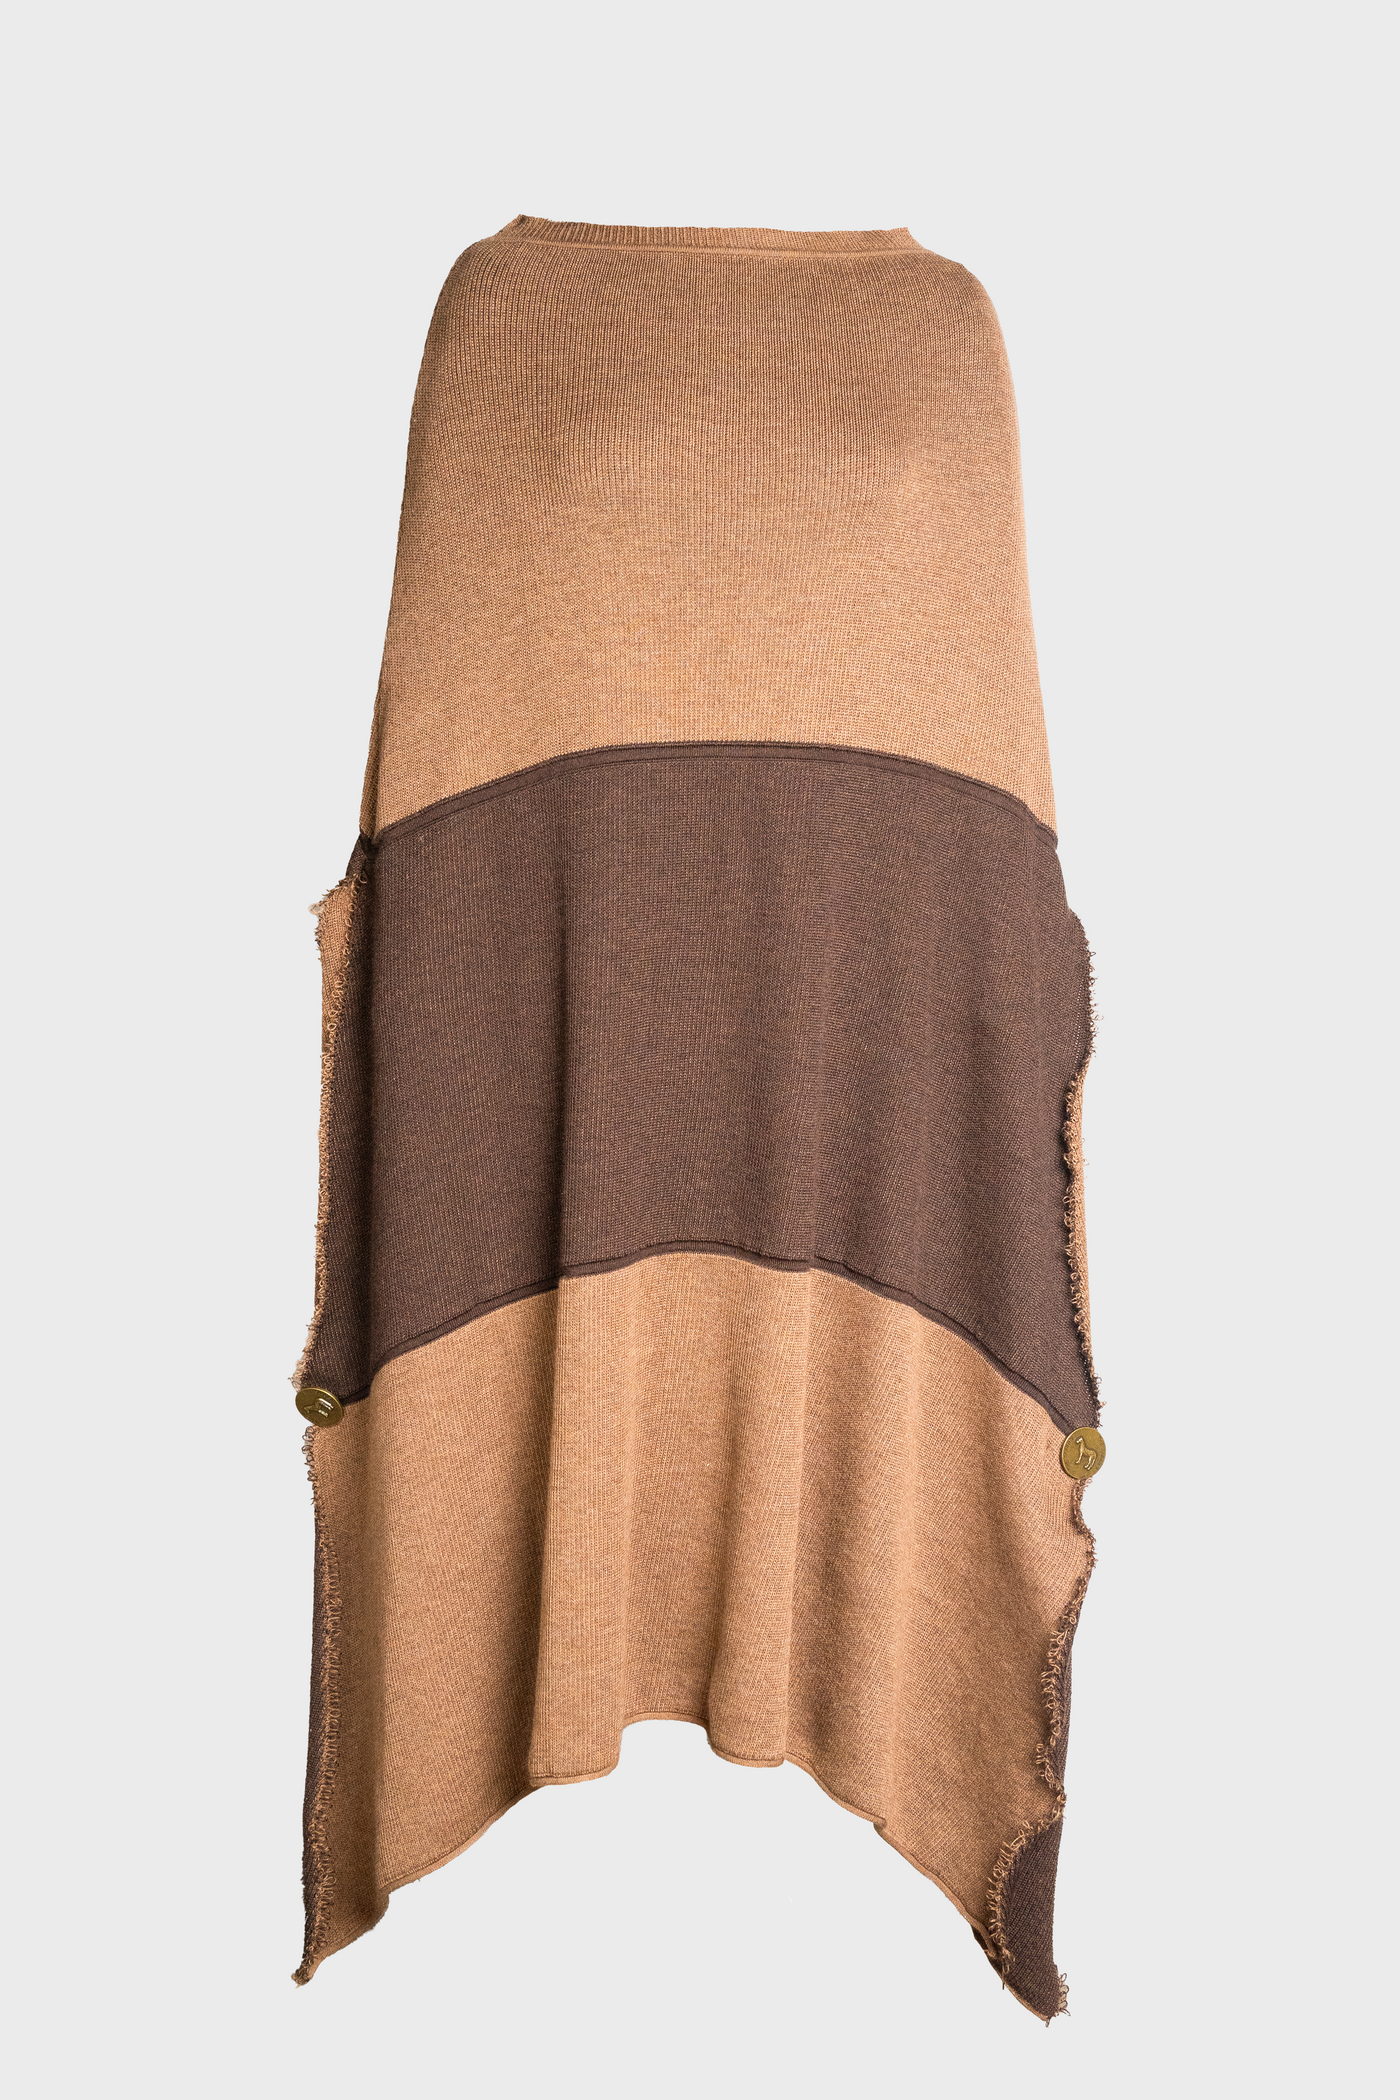 The Lefty Poncho - Brown